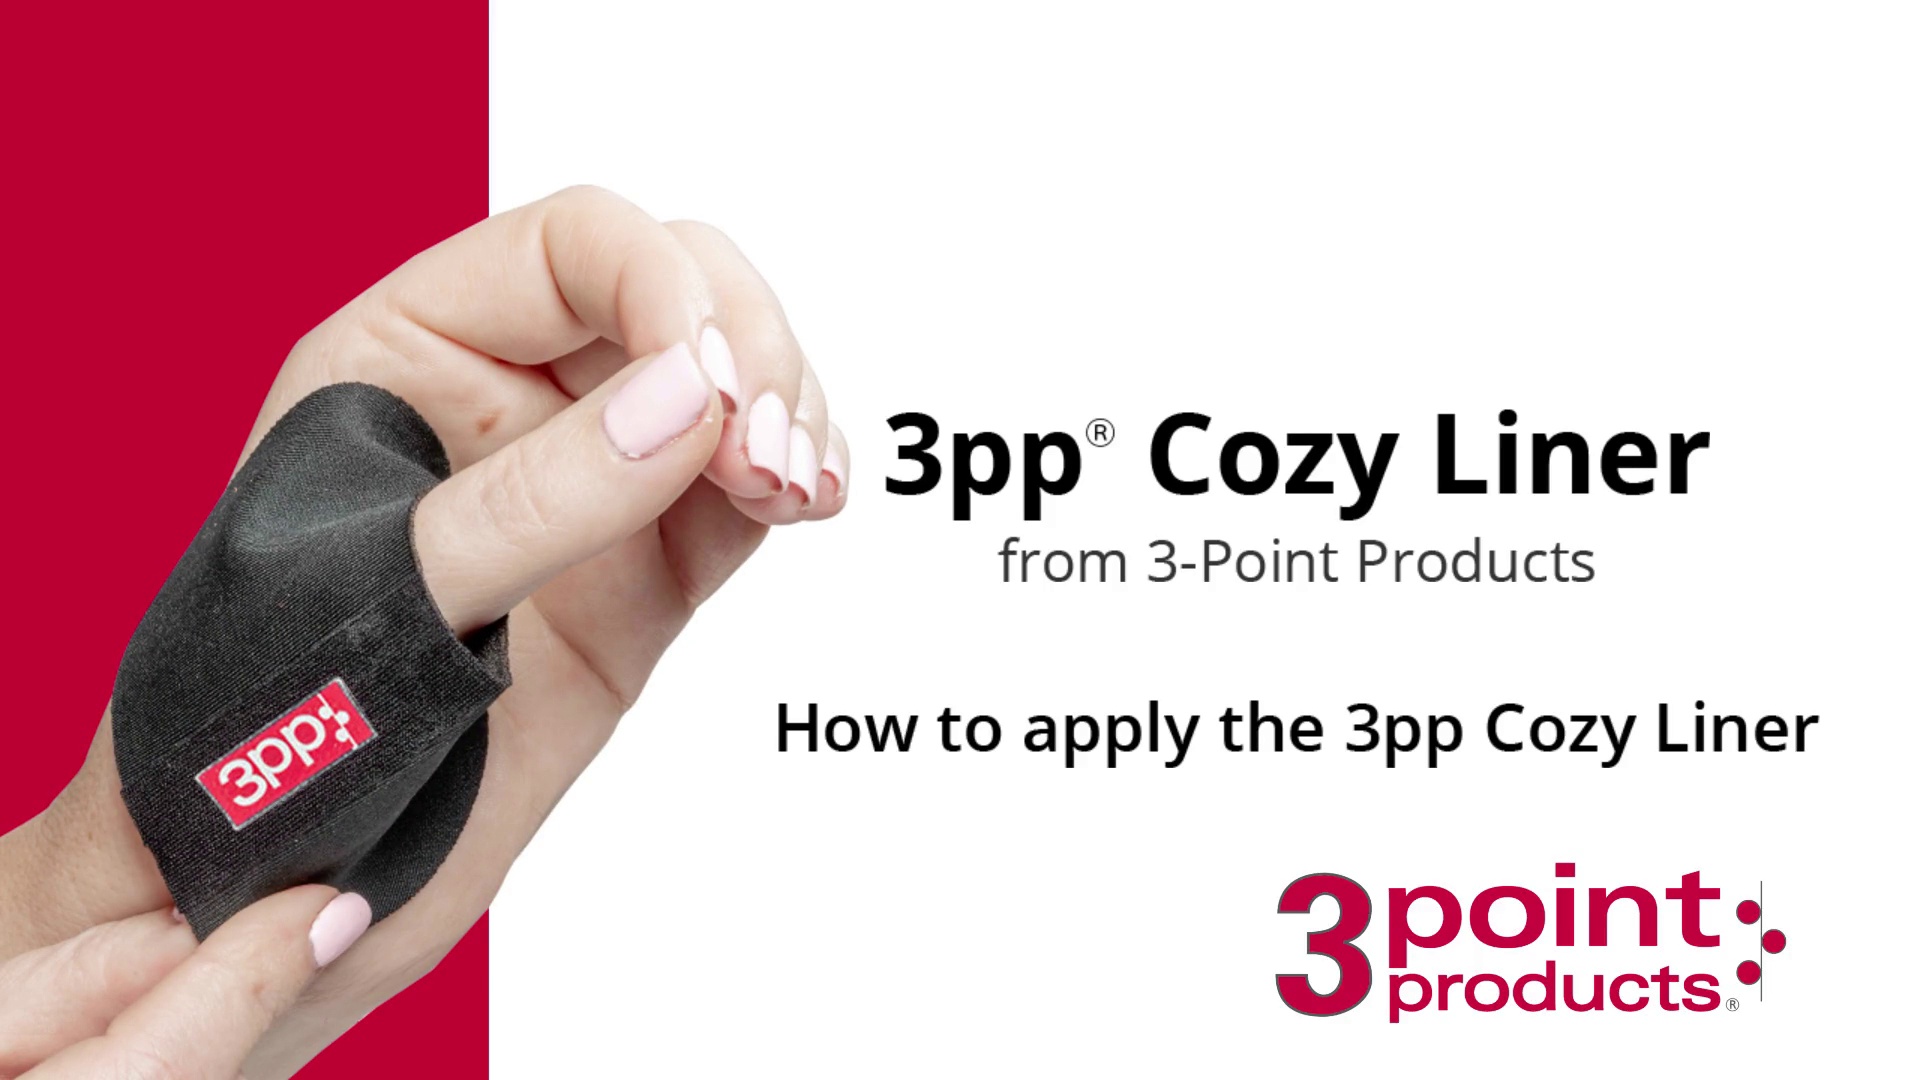 How to Apply the 3pp Cozy Liner